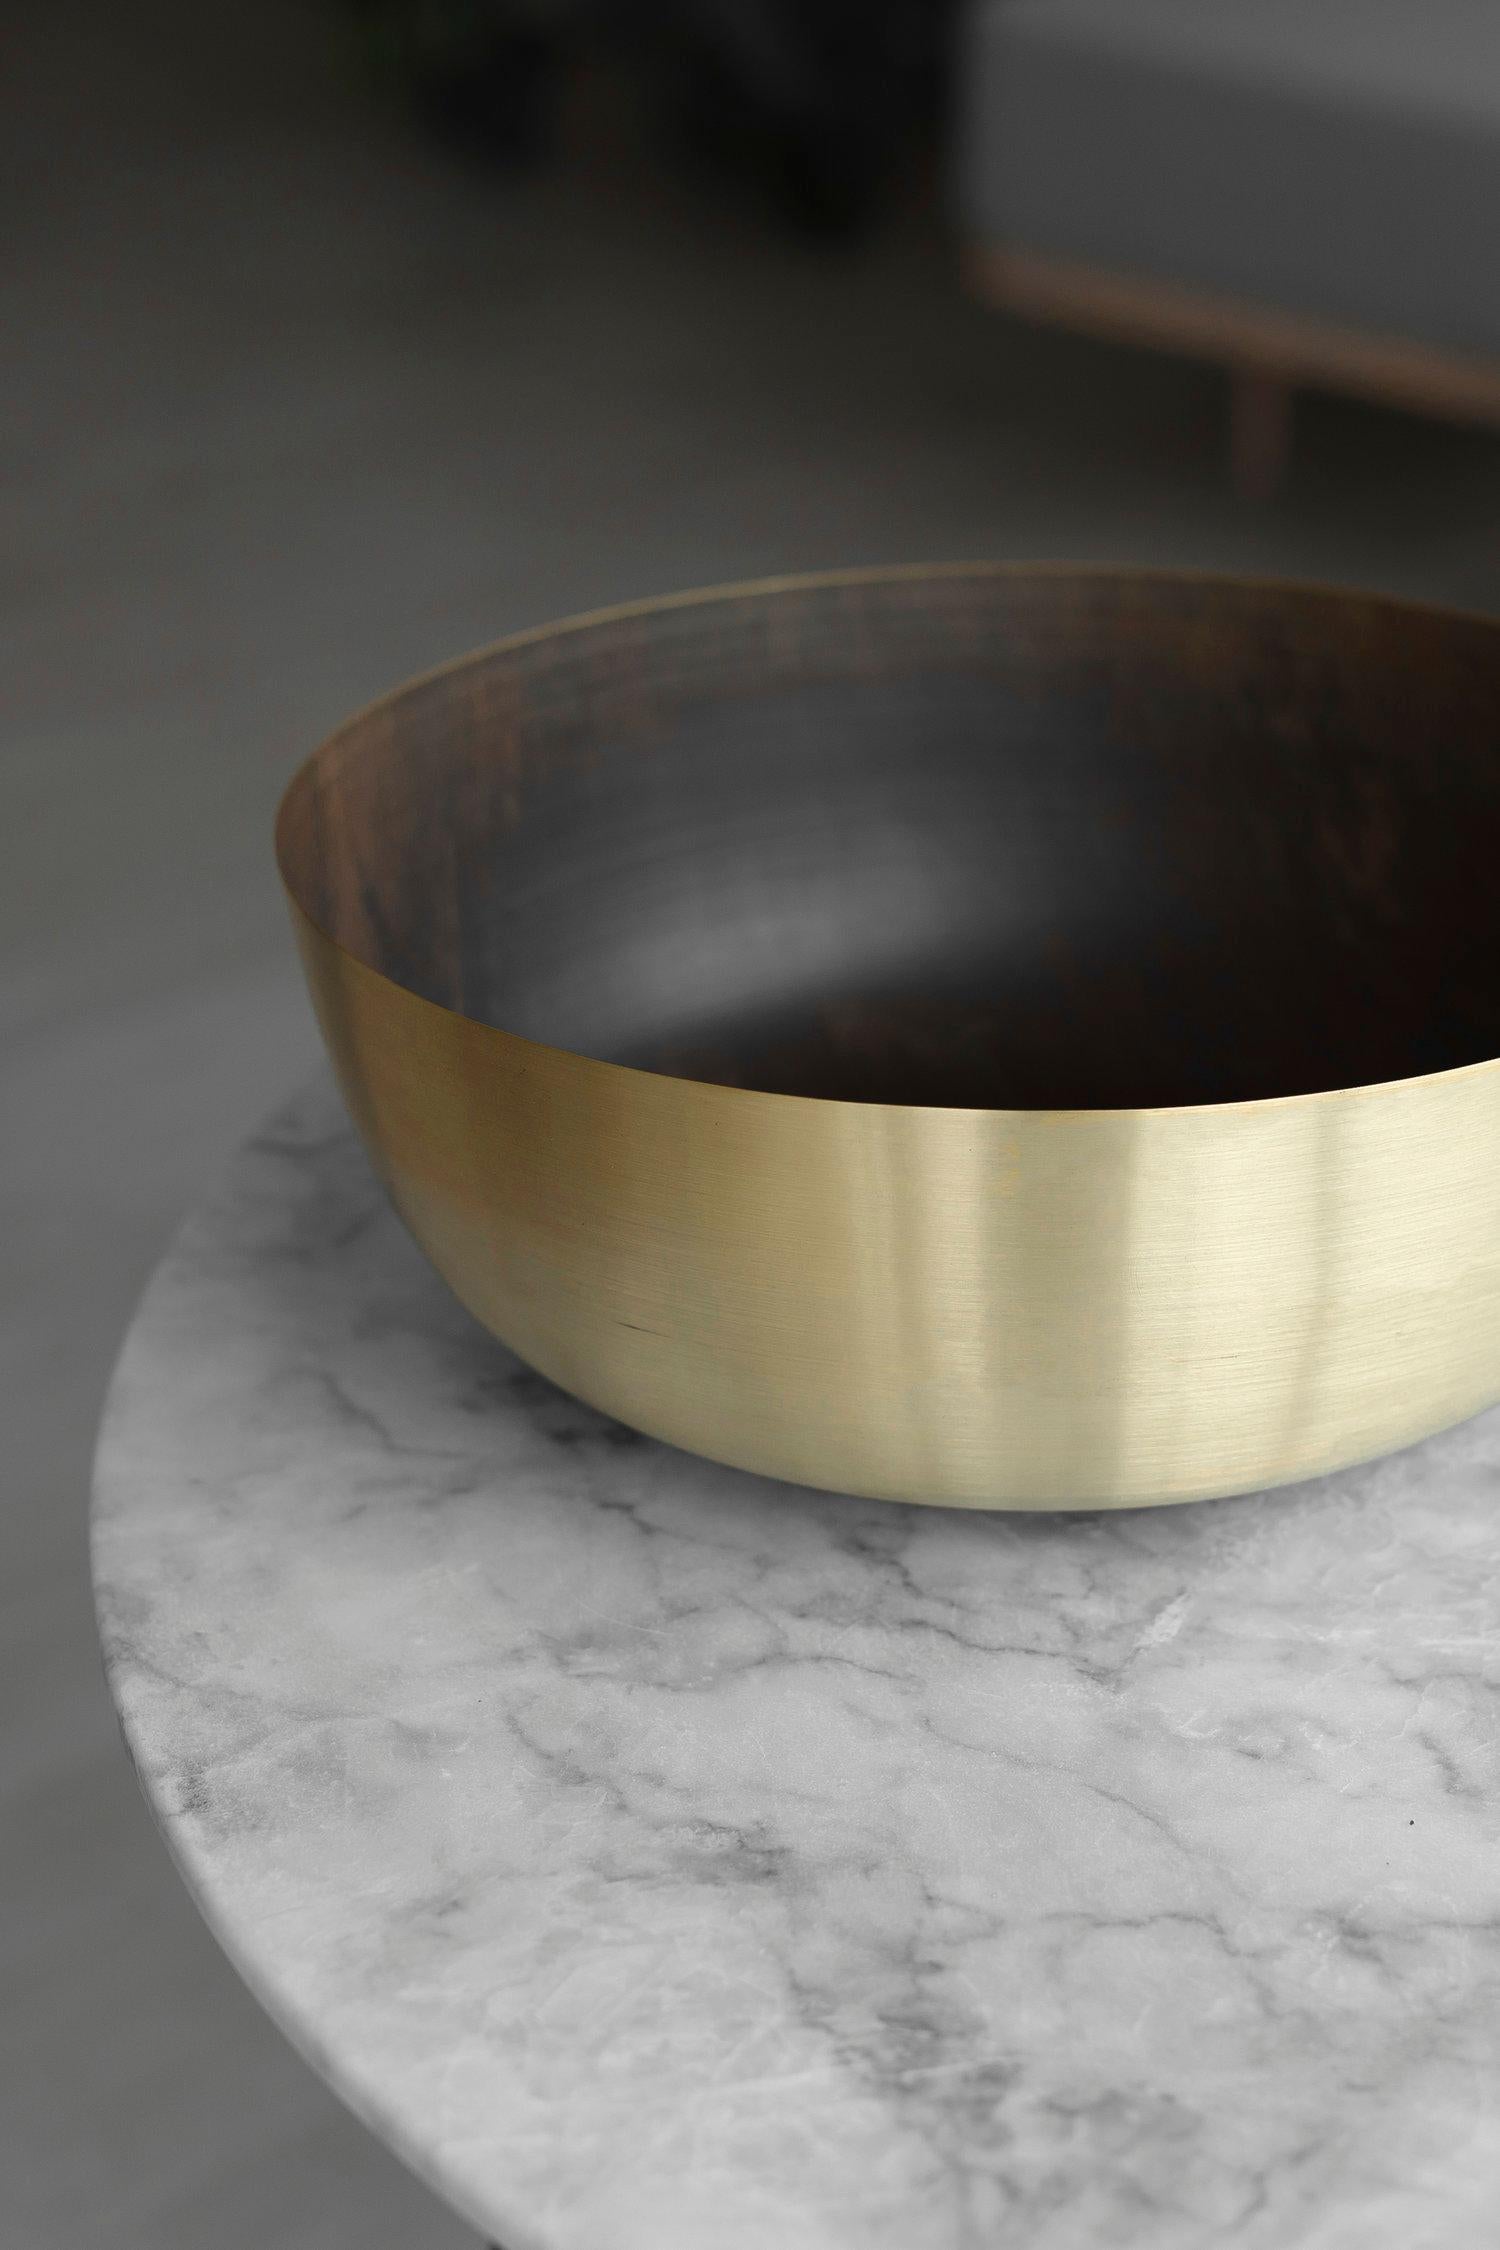 Hand Spun Brass Centerpiece Bowl

This large brass bowl makes a bold statement. Perfect for a large space and a long dinner table, this handmade artisanal bowl is the perfect minimalist centerpiece to draw the eye. A large bowl like this one works